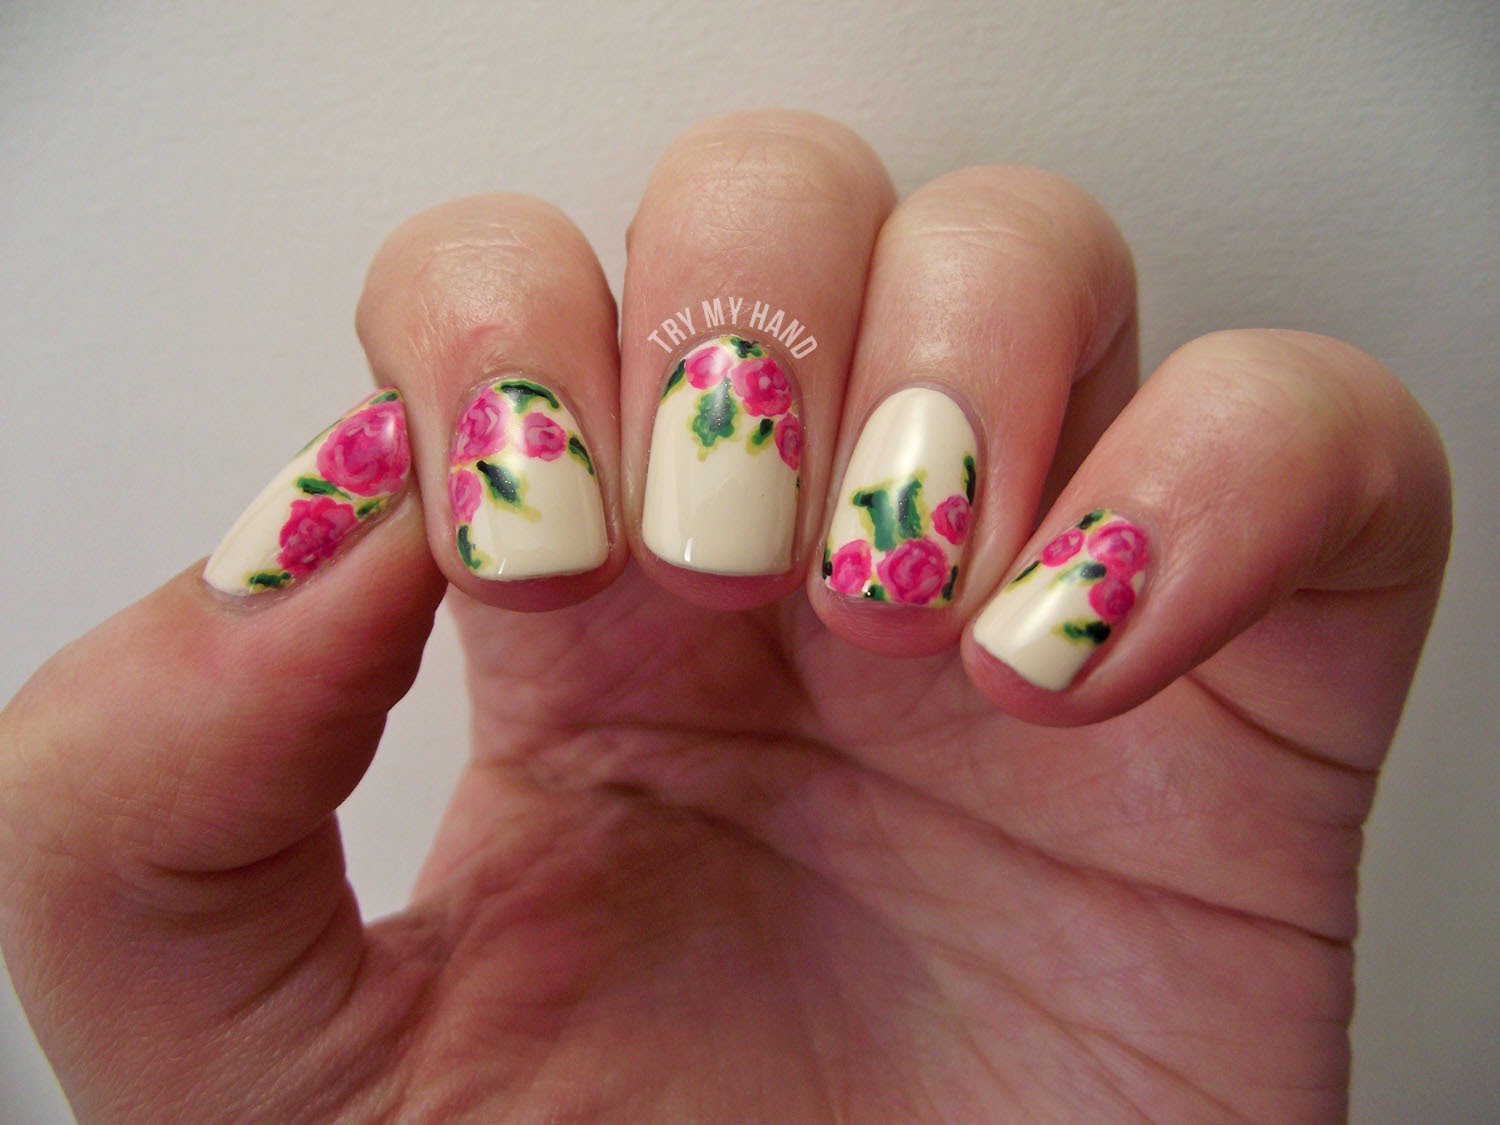 1. Easy Floral Nail Art Design Tutorial - wide 3